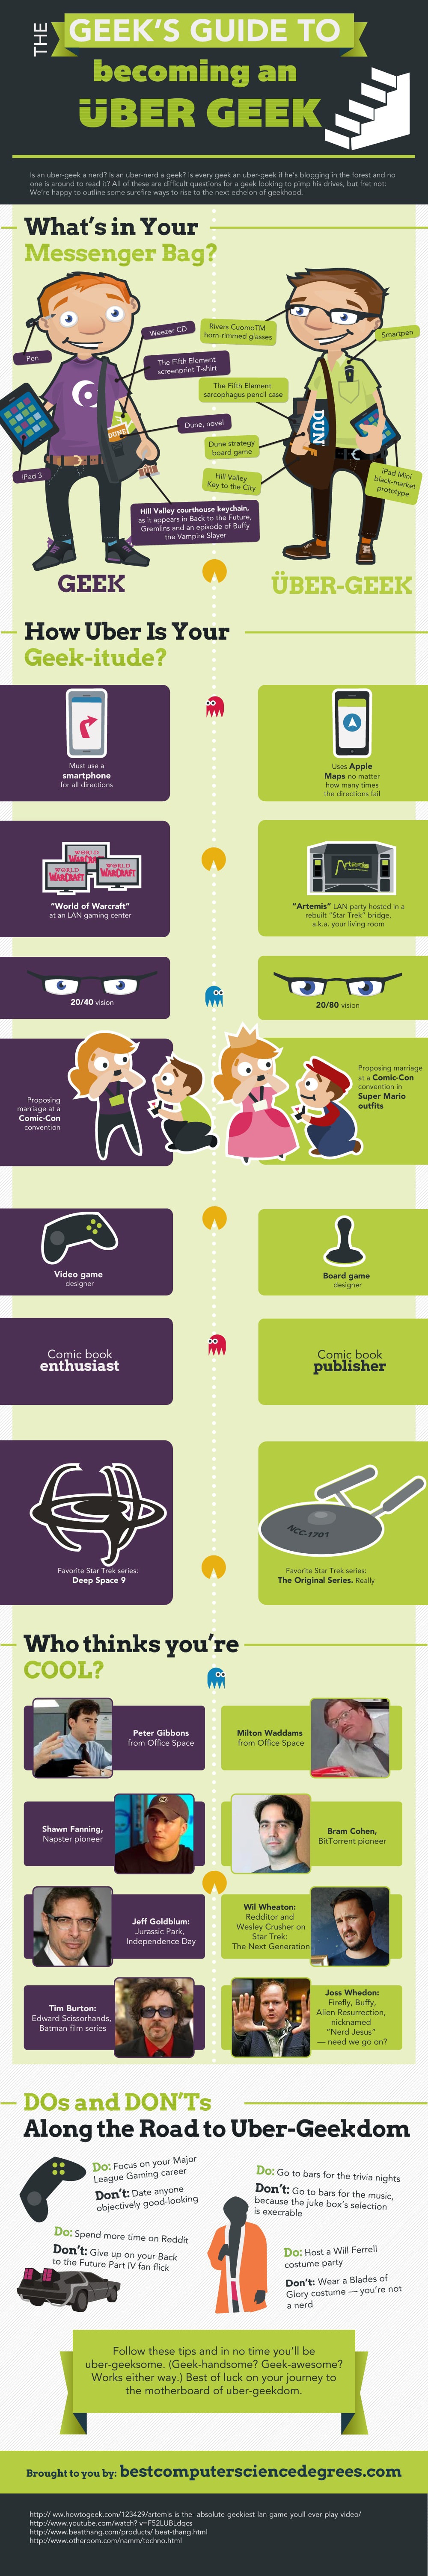 geeks-ultimate-guide-infographic